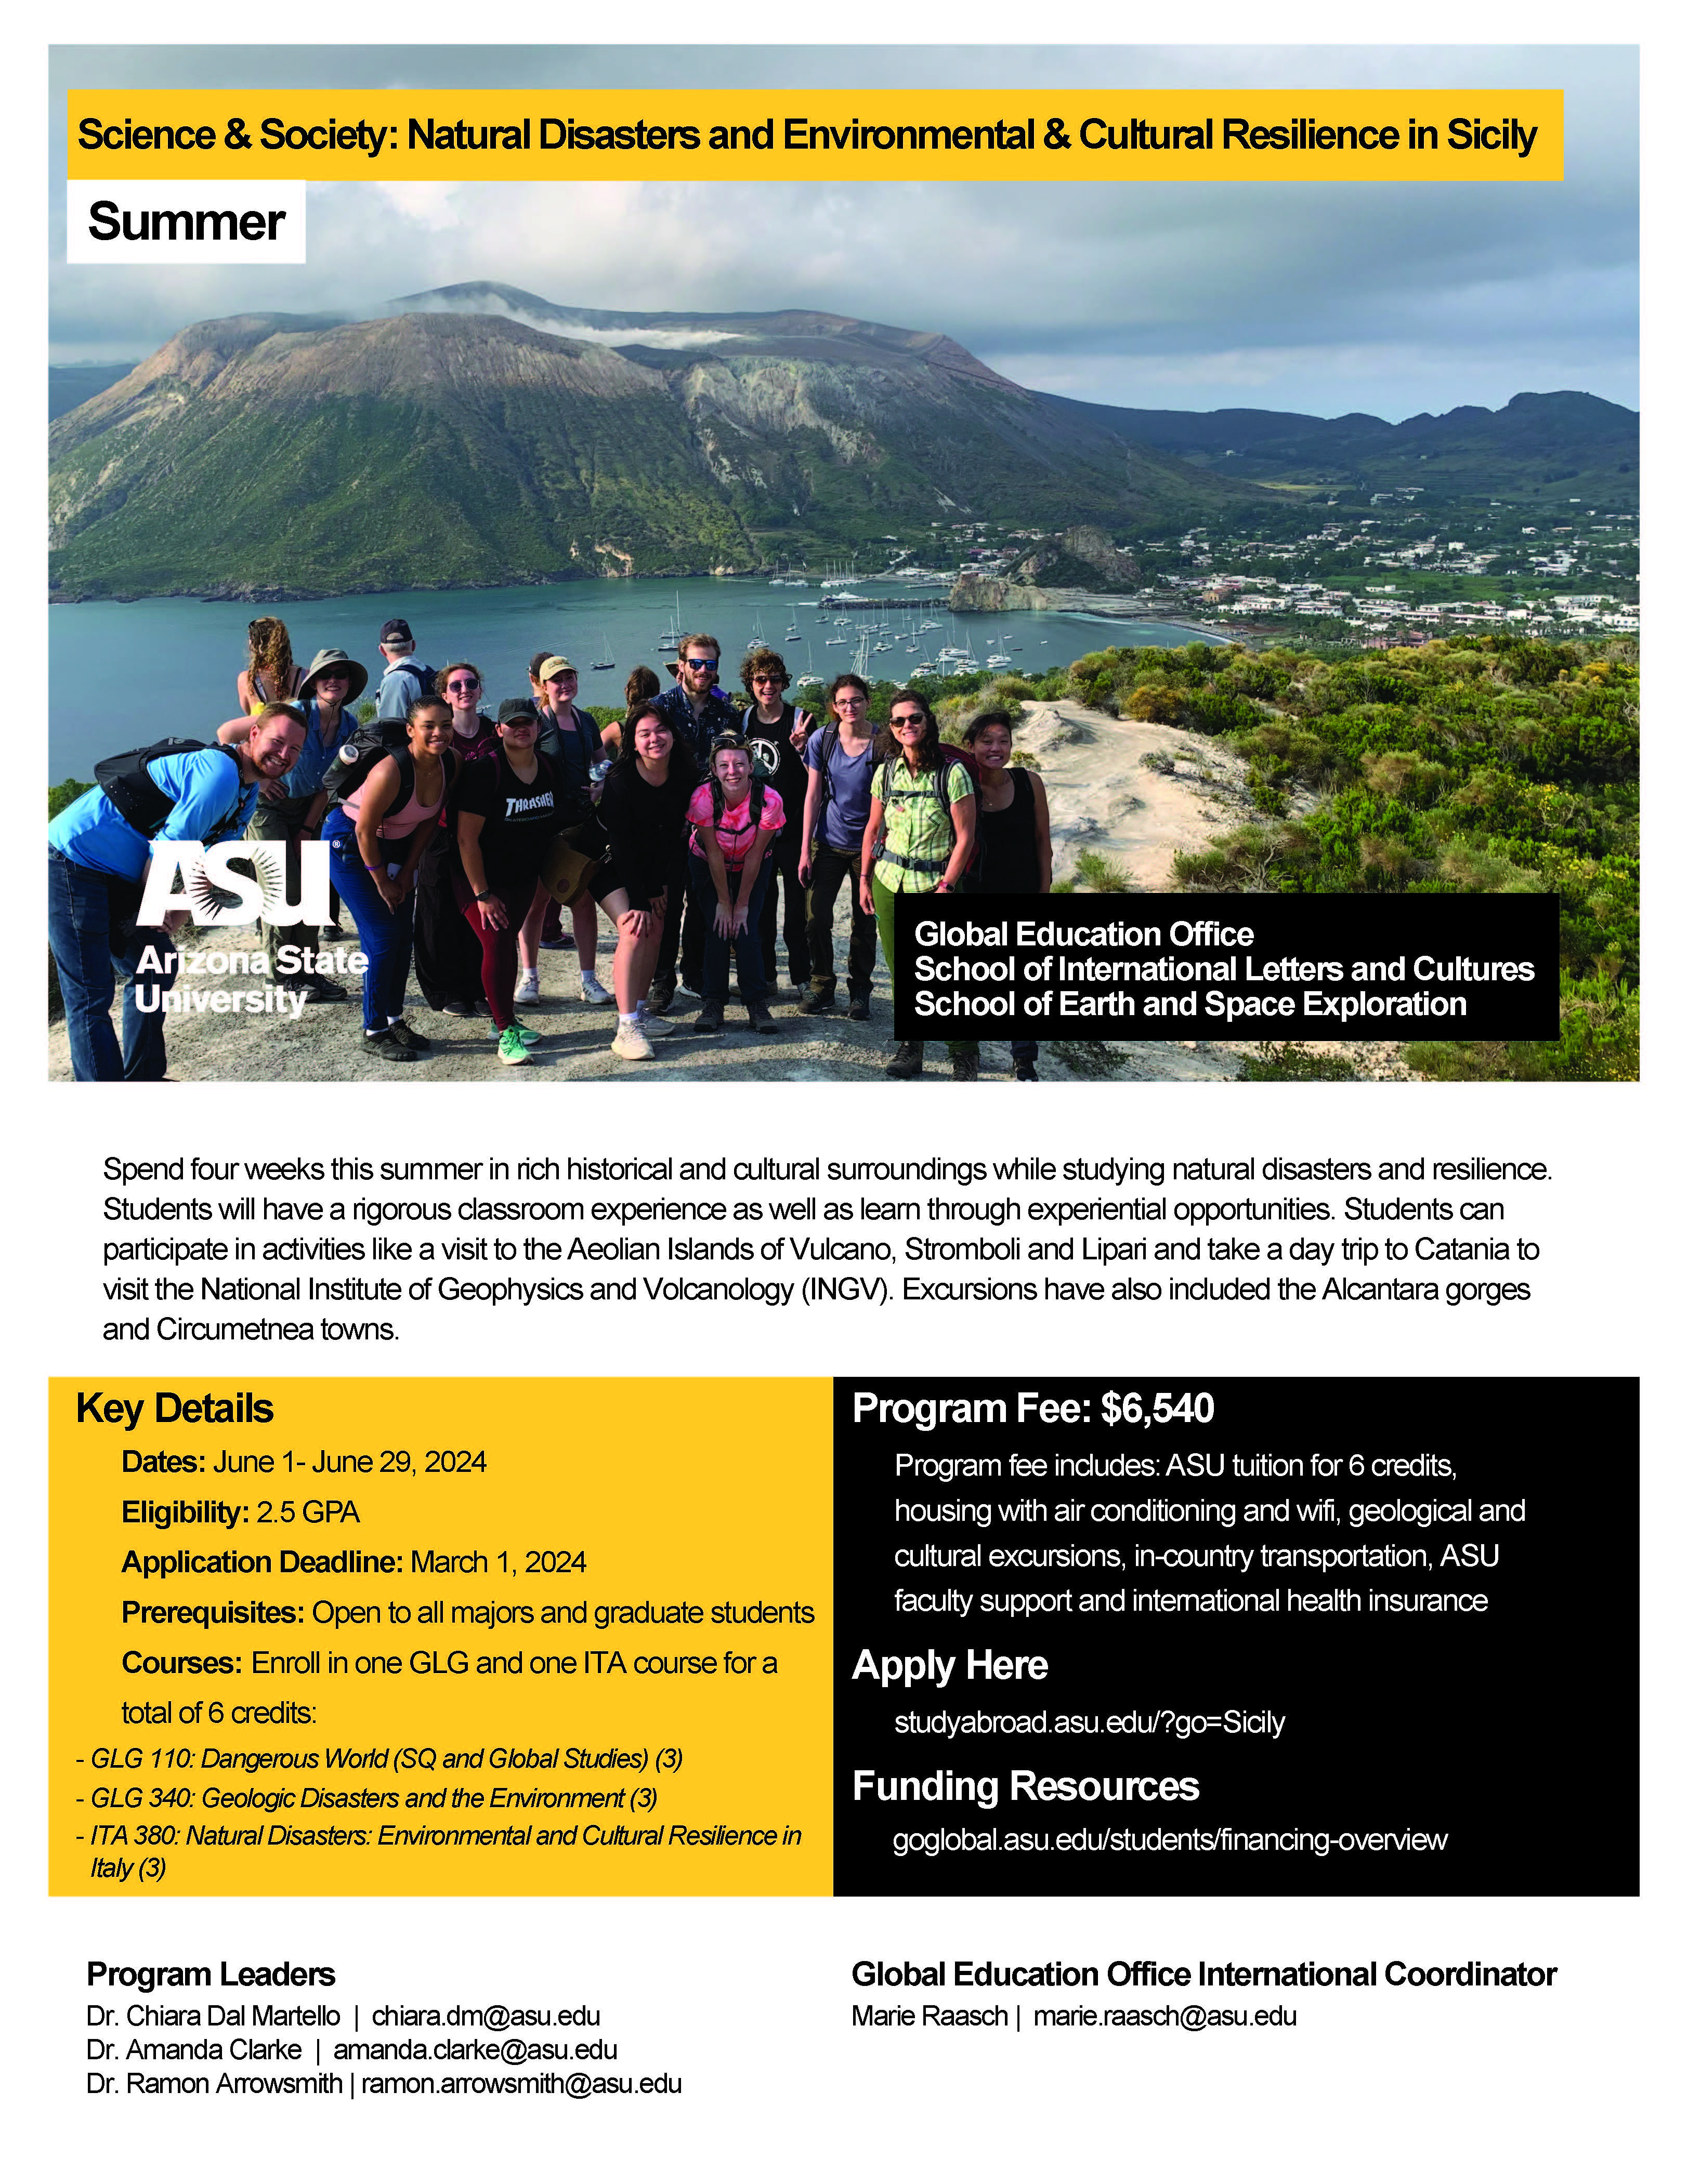 This image is flyer for this experience (Science and Society in Sicily) that will be held in summer 2024. The information found in this flyer is presented in the webpage for this experience.